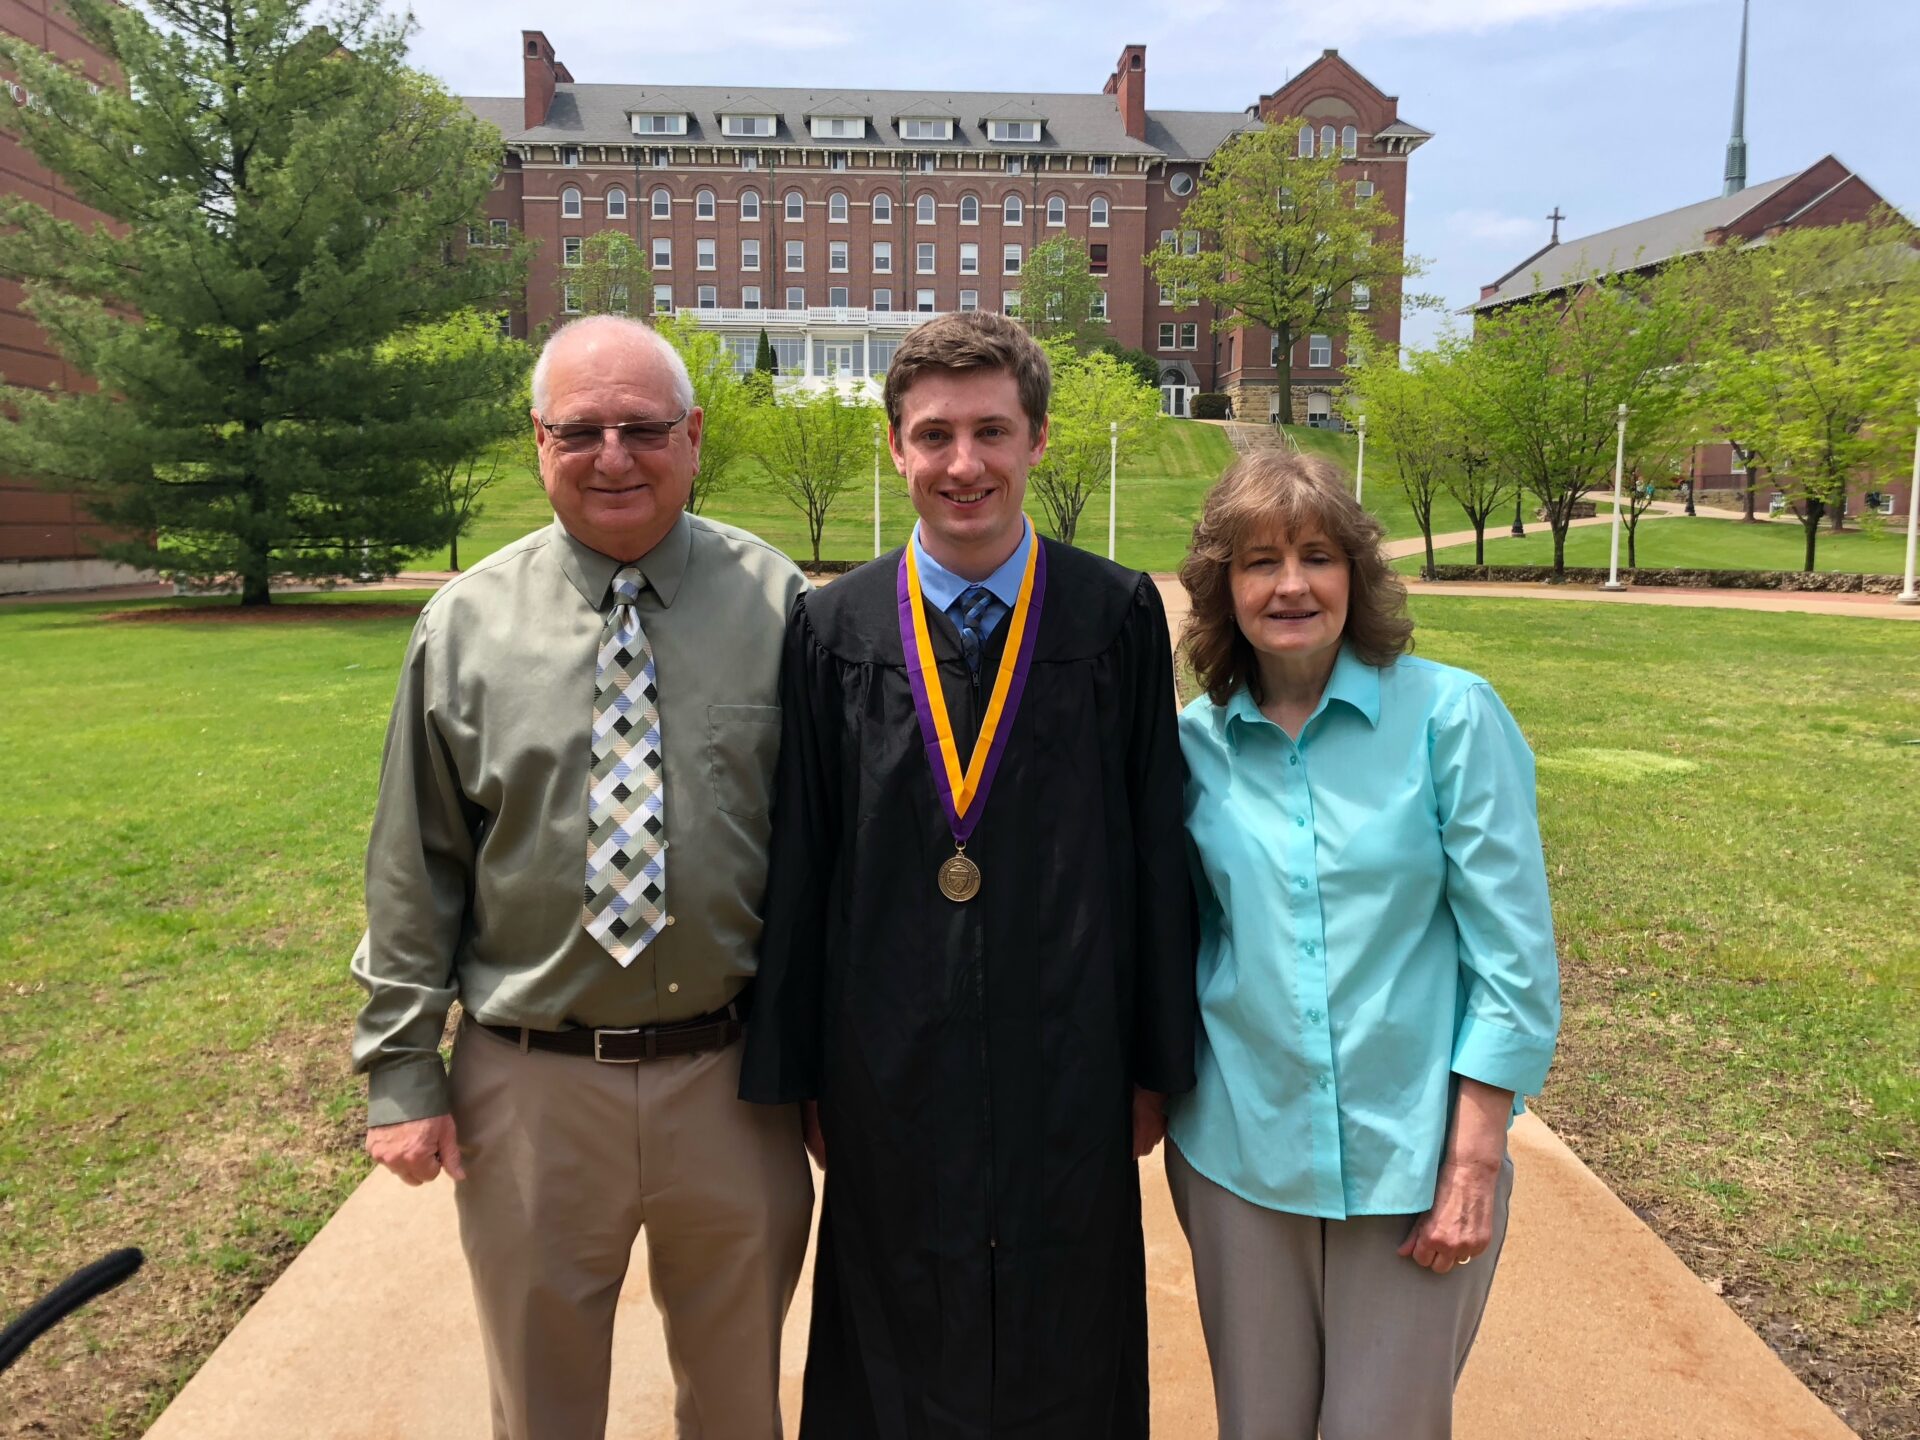 Jordan poses with his parents on college graduation day